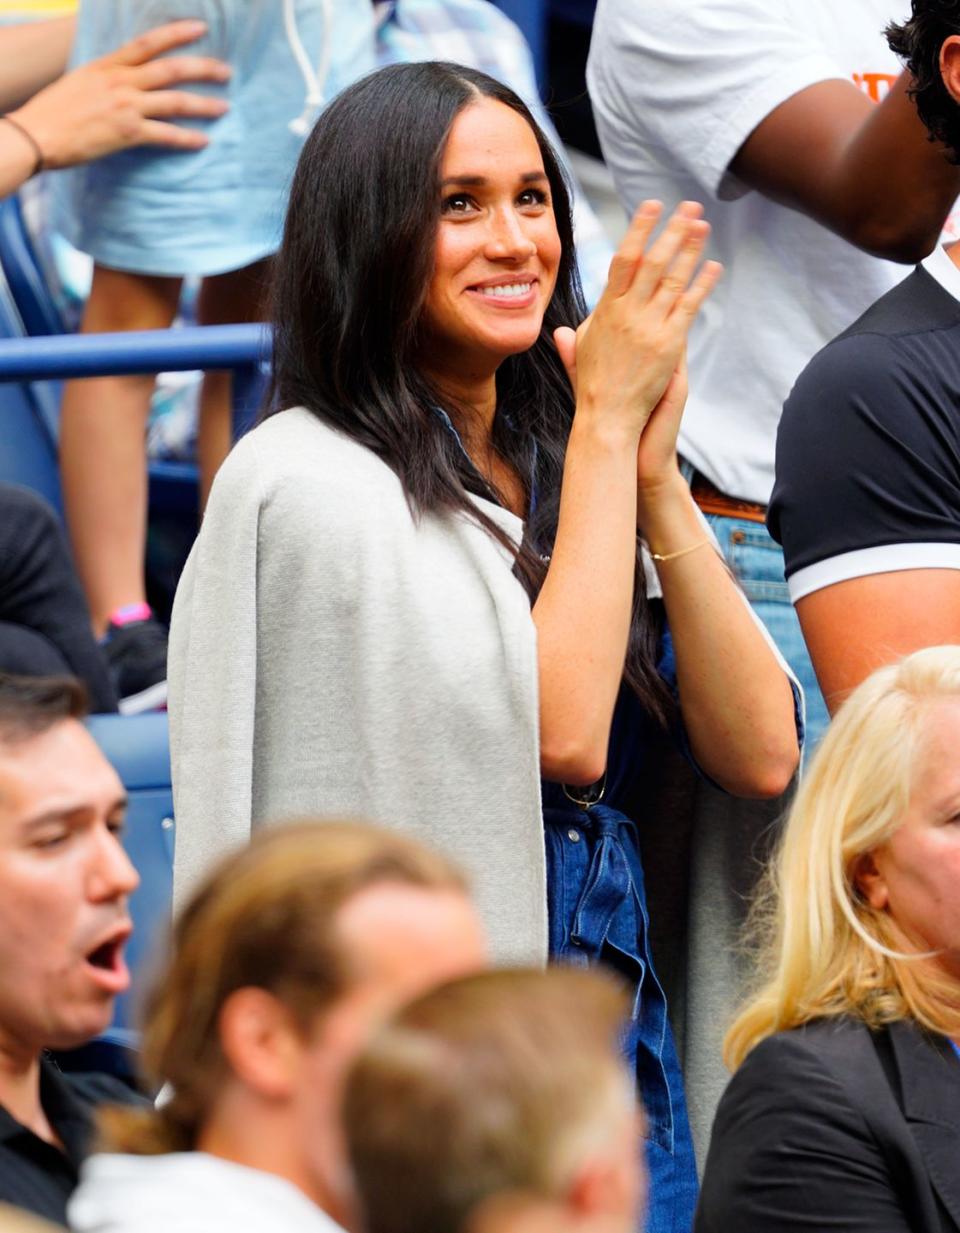 She Made a Surprise Appearance at the U.S. Open